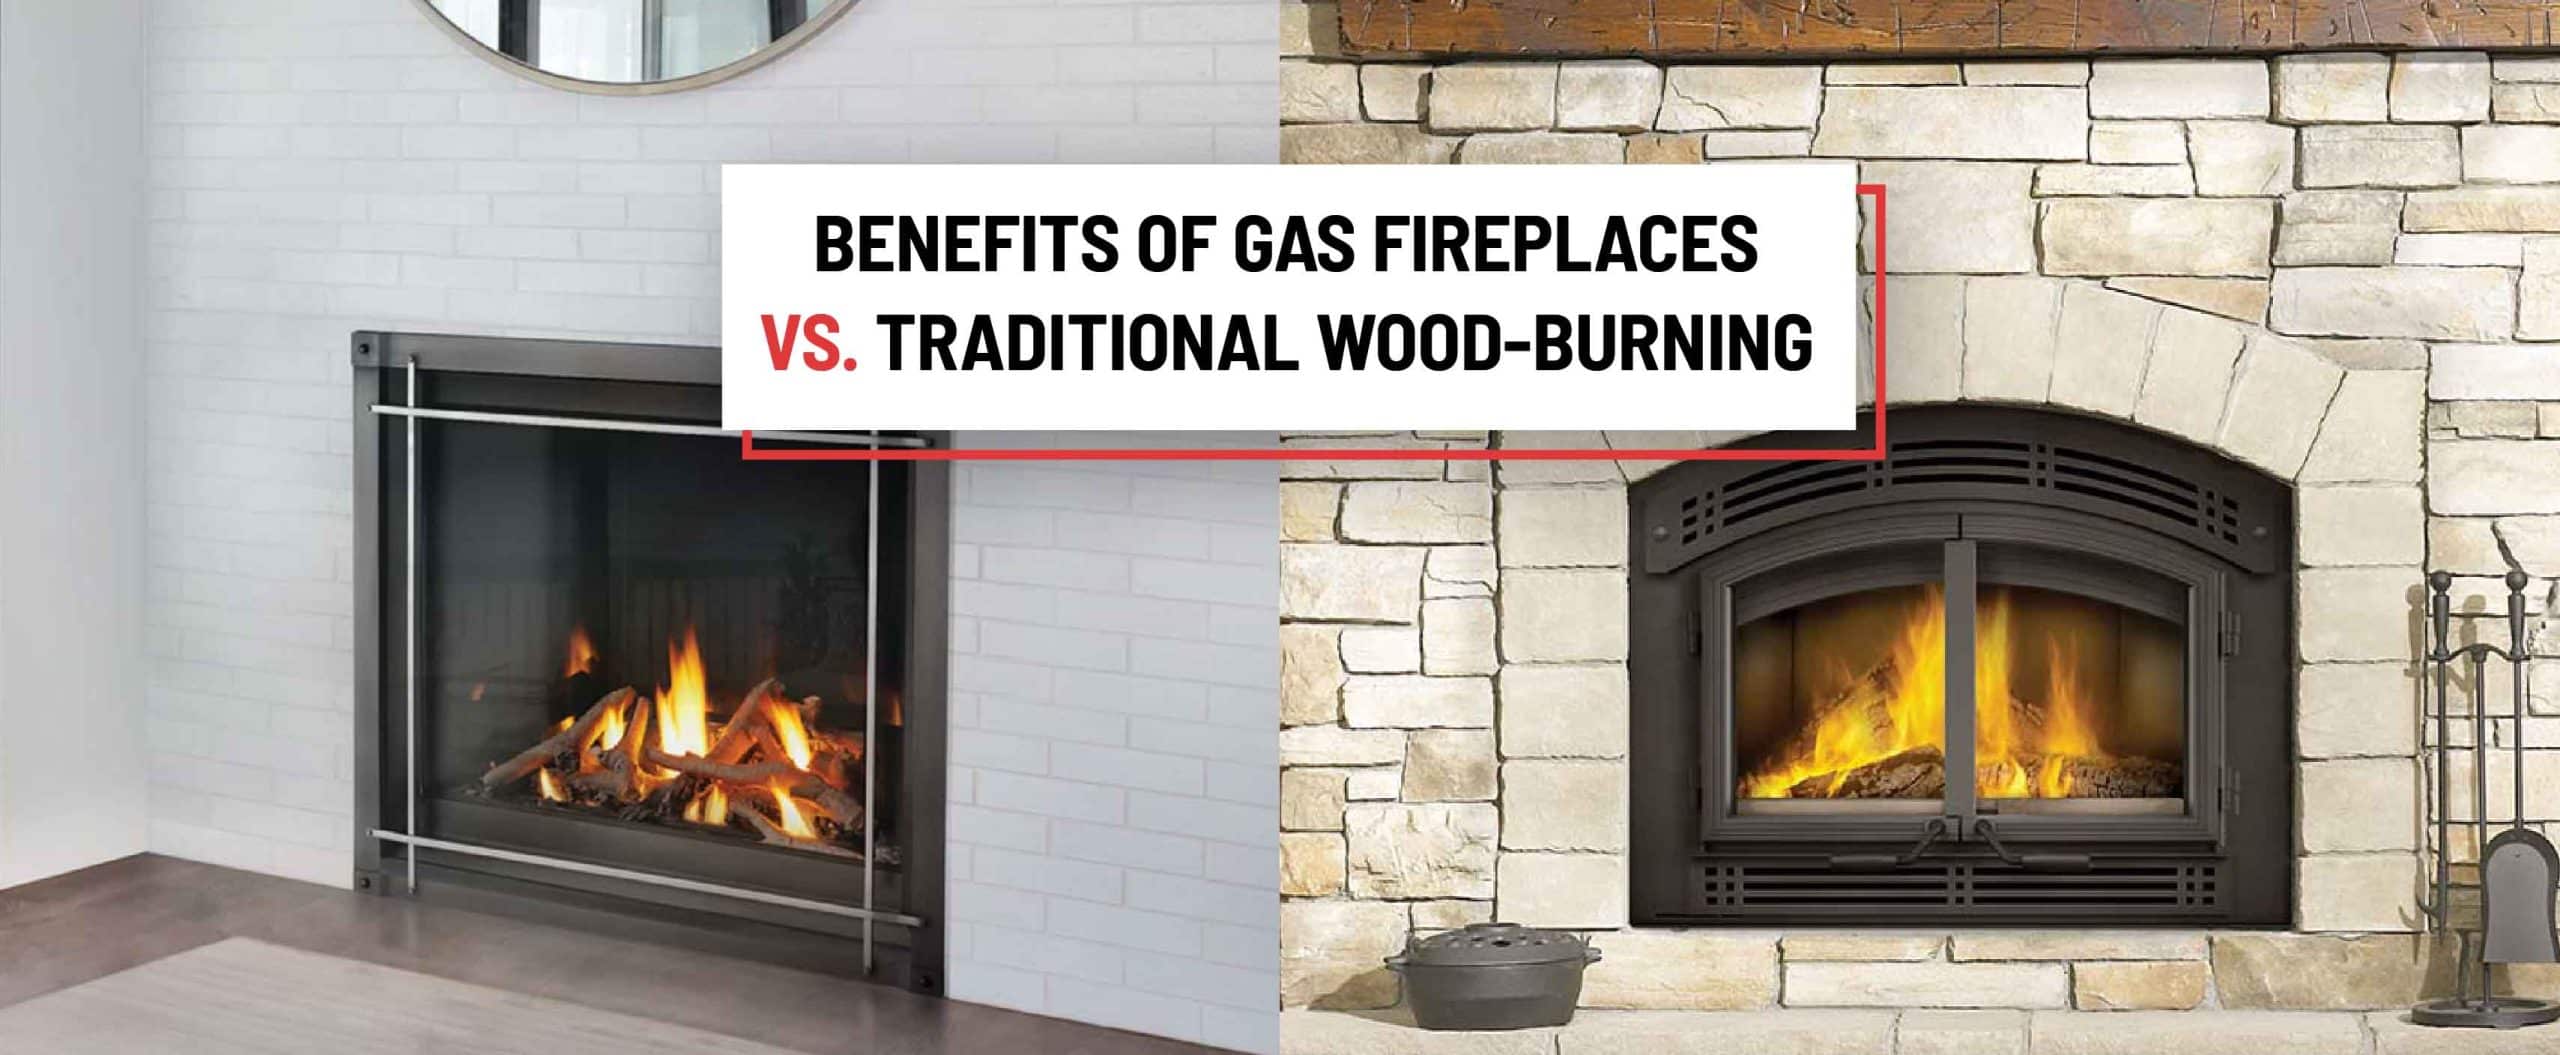 benefits gas fireplaces